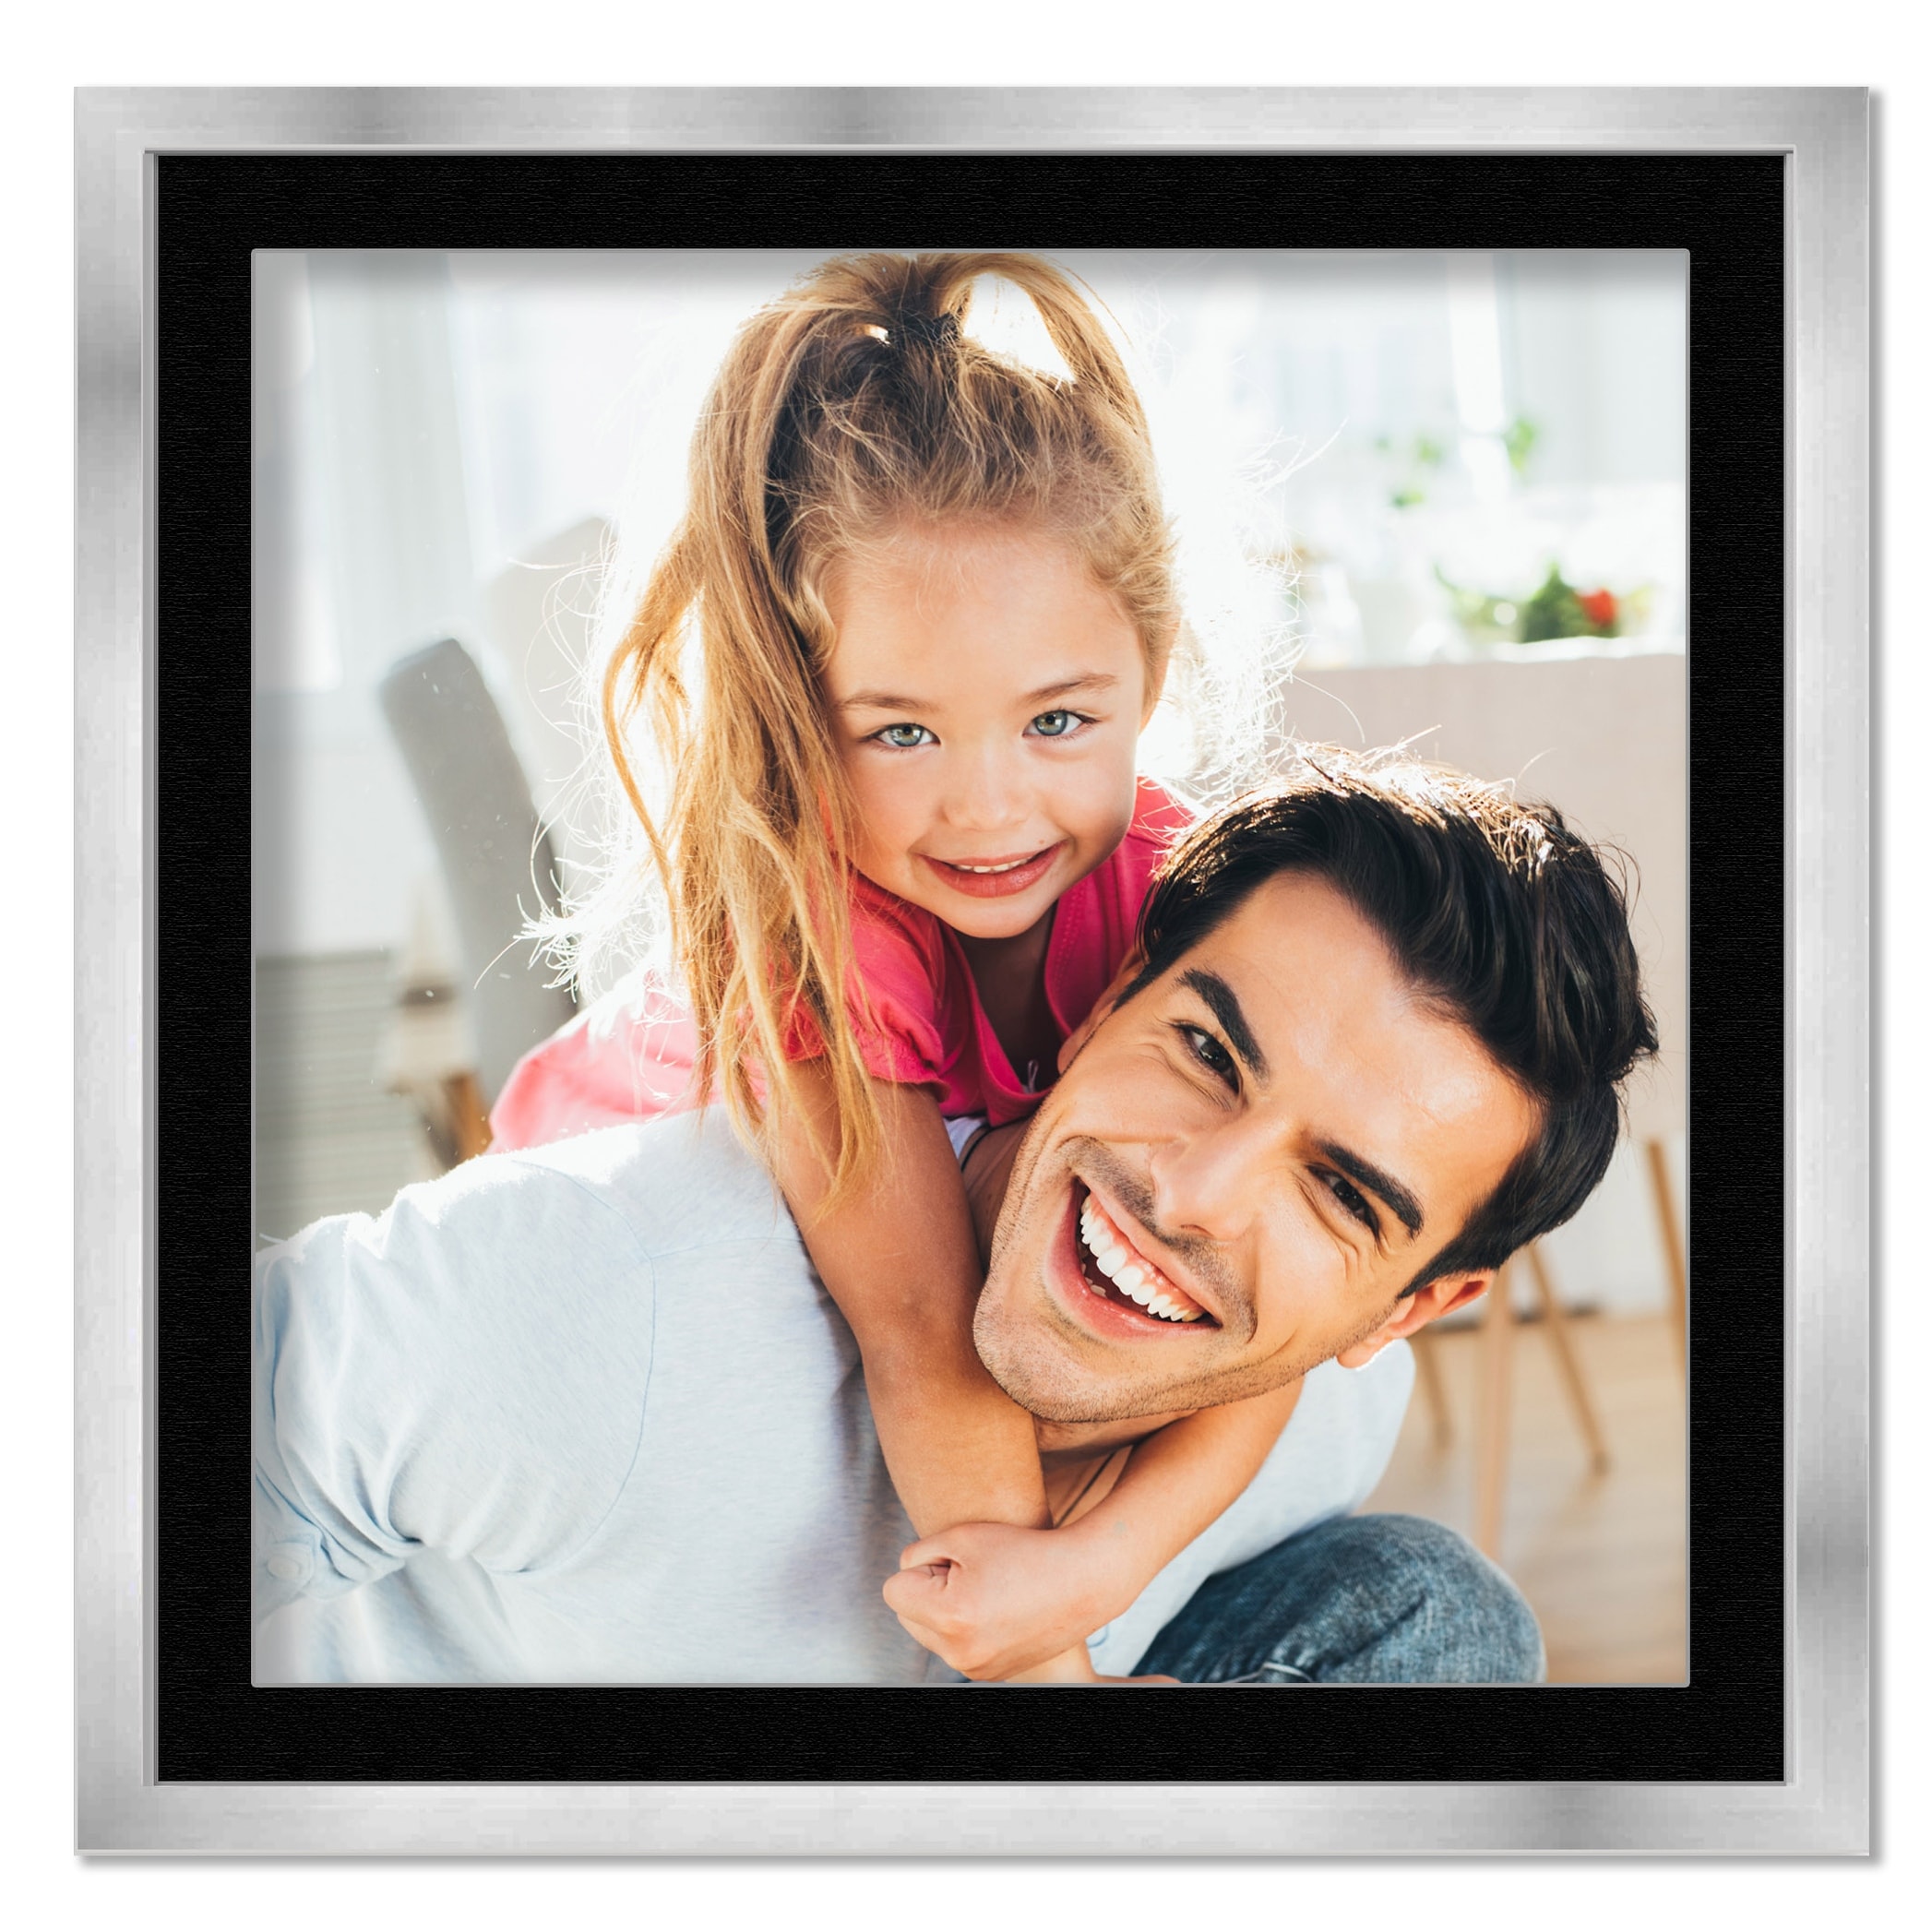 20x20 Frame with Mat - Silver 22X22 Frame Wood Made to Display Print or Poster Measuring 20 x 20 Inches with Black Photo Mat